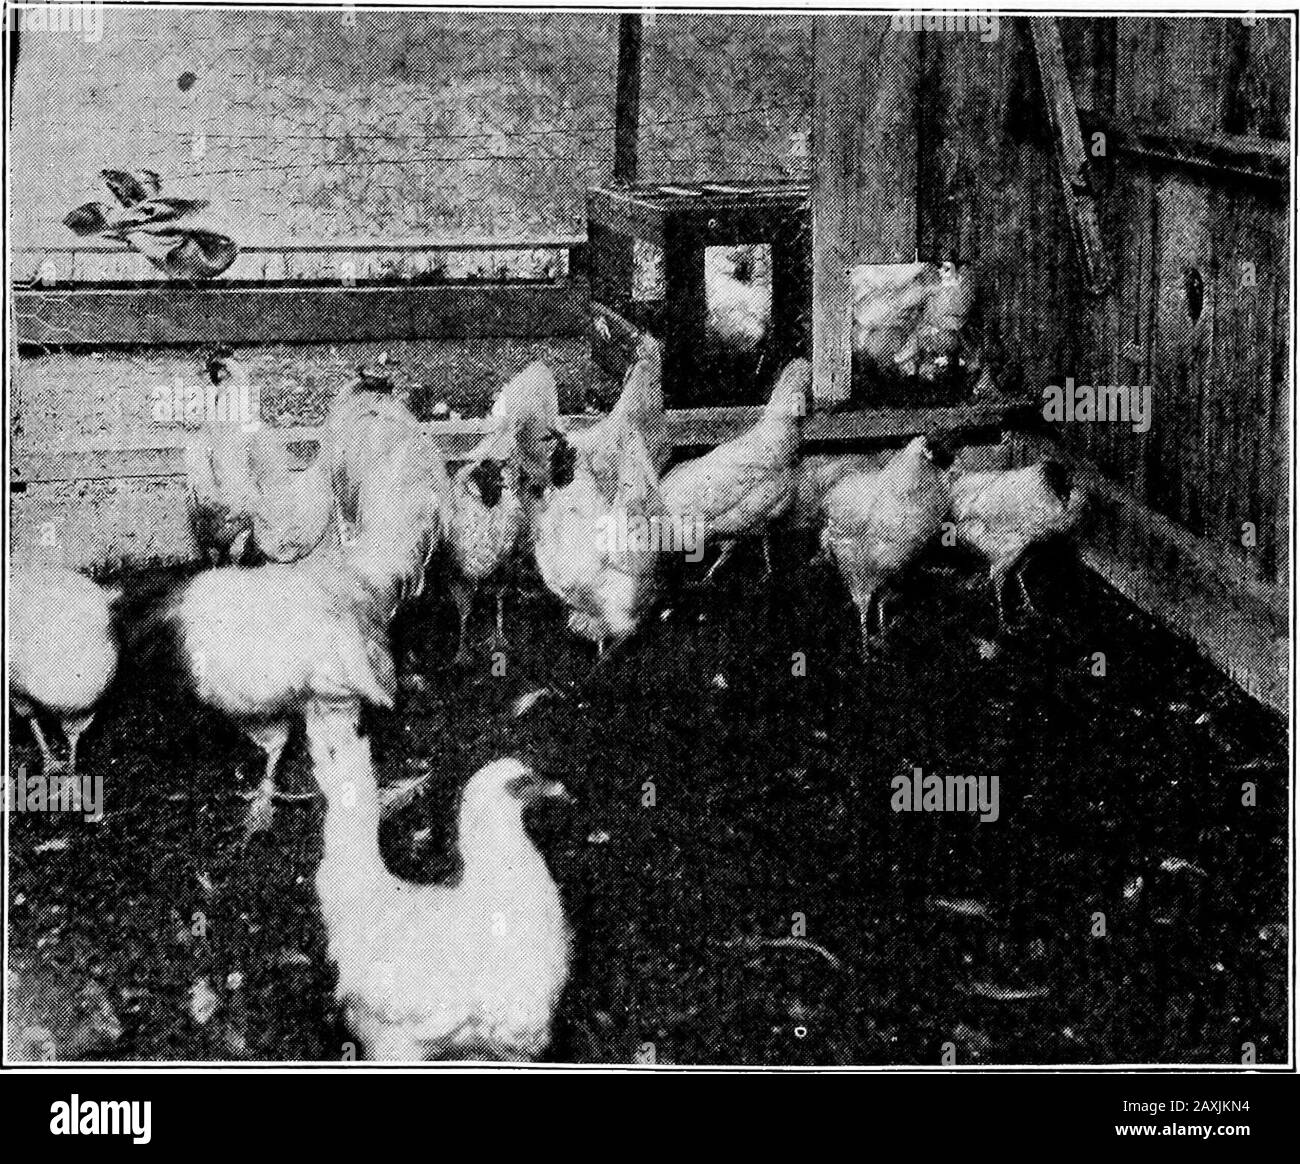 The call of the hen; or, The science of selecting and breeding poultry for egg-production . ill proceed to show howto judge the hen with the least amount of time and labor. Fig. 1 shows the interior of an open-front colony house, largely usedaround Petaluma. The roosts are connected to the house by hinges, sothey can be hooked up out of the way while cleaning the house or ex-amining the hens, as in the present case. These houses are usuallyabout 8 feet wide and 10 feet deep inside, with 4 feet posts and pitchroof. These houses are open front, with the exception of 18 inches oneach side, as can Stock Photo